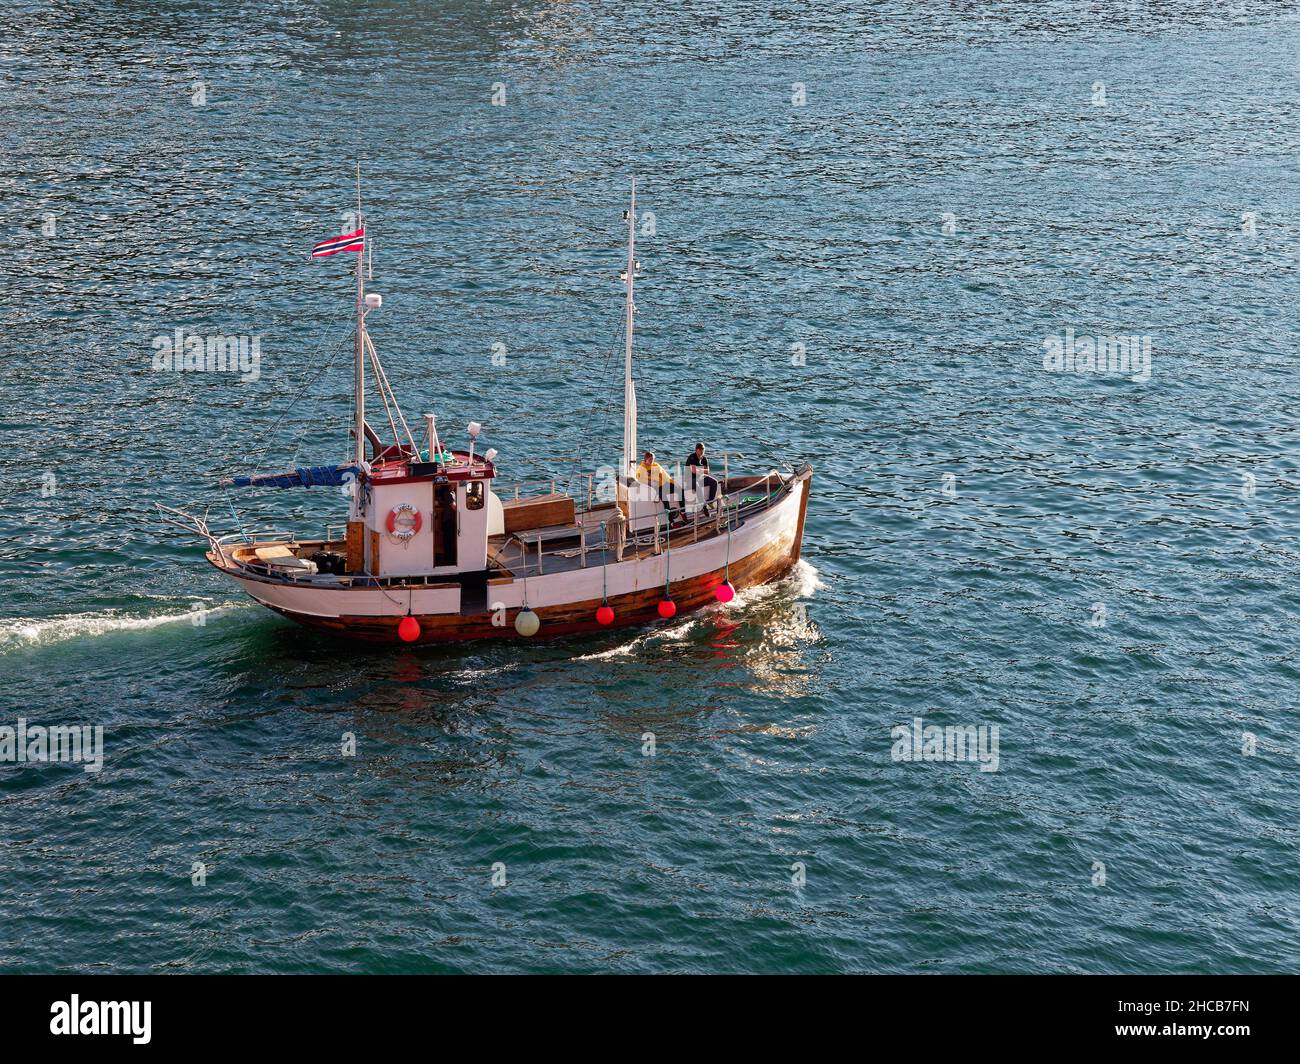 A Traditional restored wooden Fishing Vessel departs Bergen for a Pleasure Cruise on the calm waters of the Fjord on a bright Summers day. Stock Photo